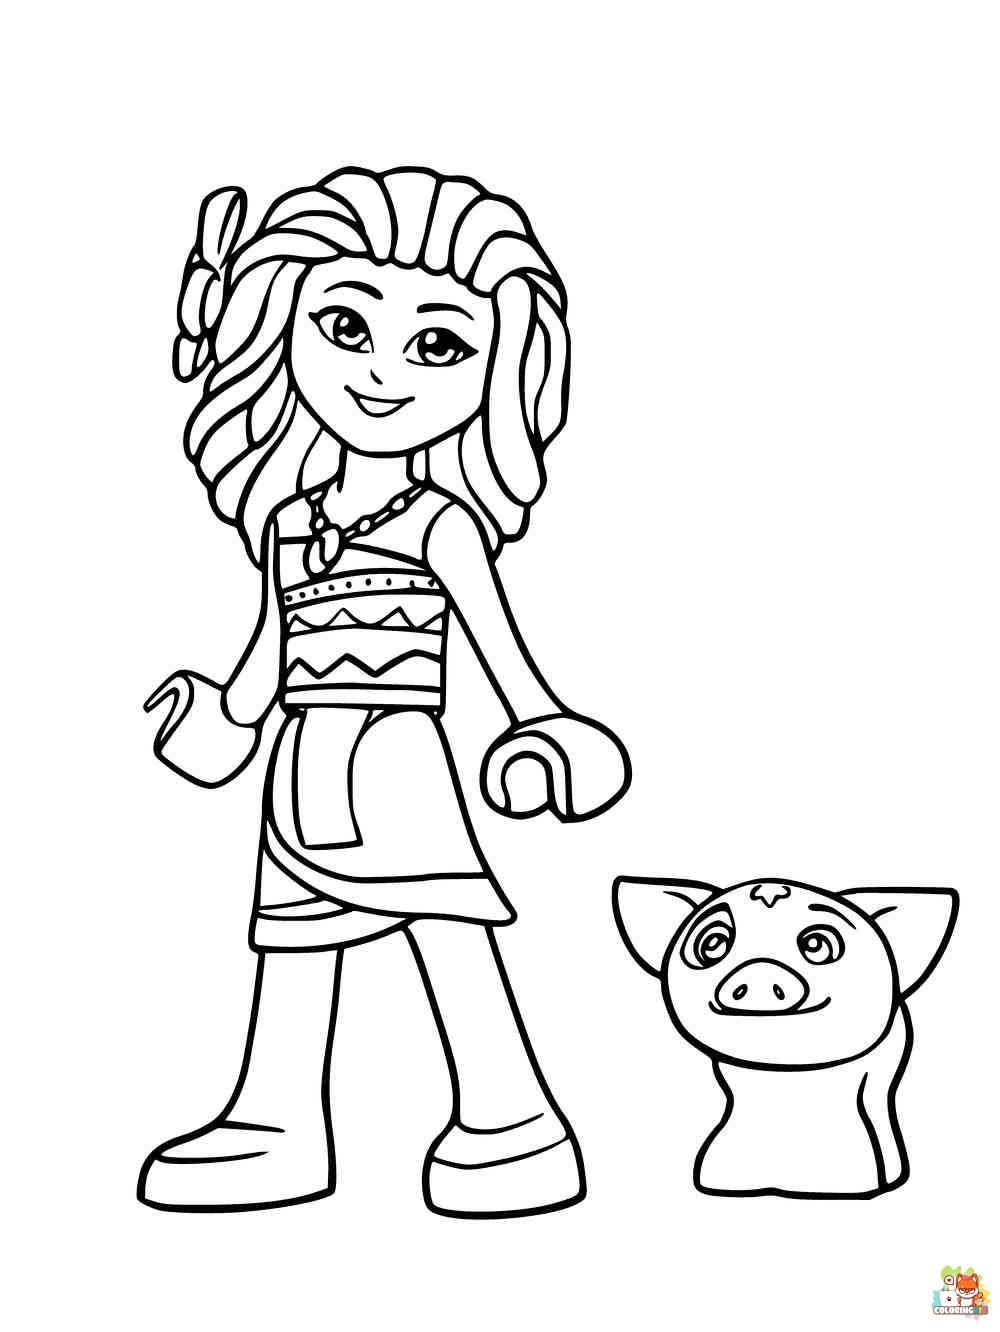 Lego Princess Coloring Pages 7